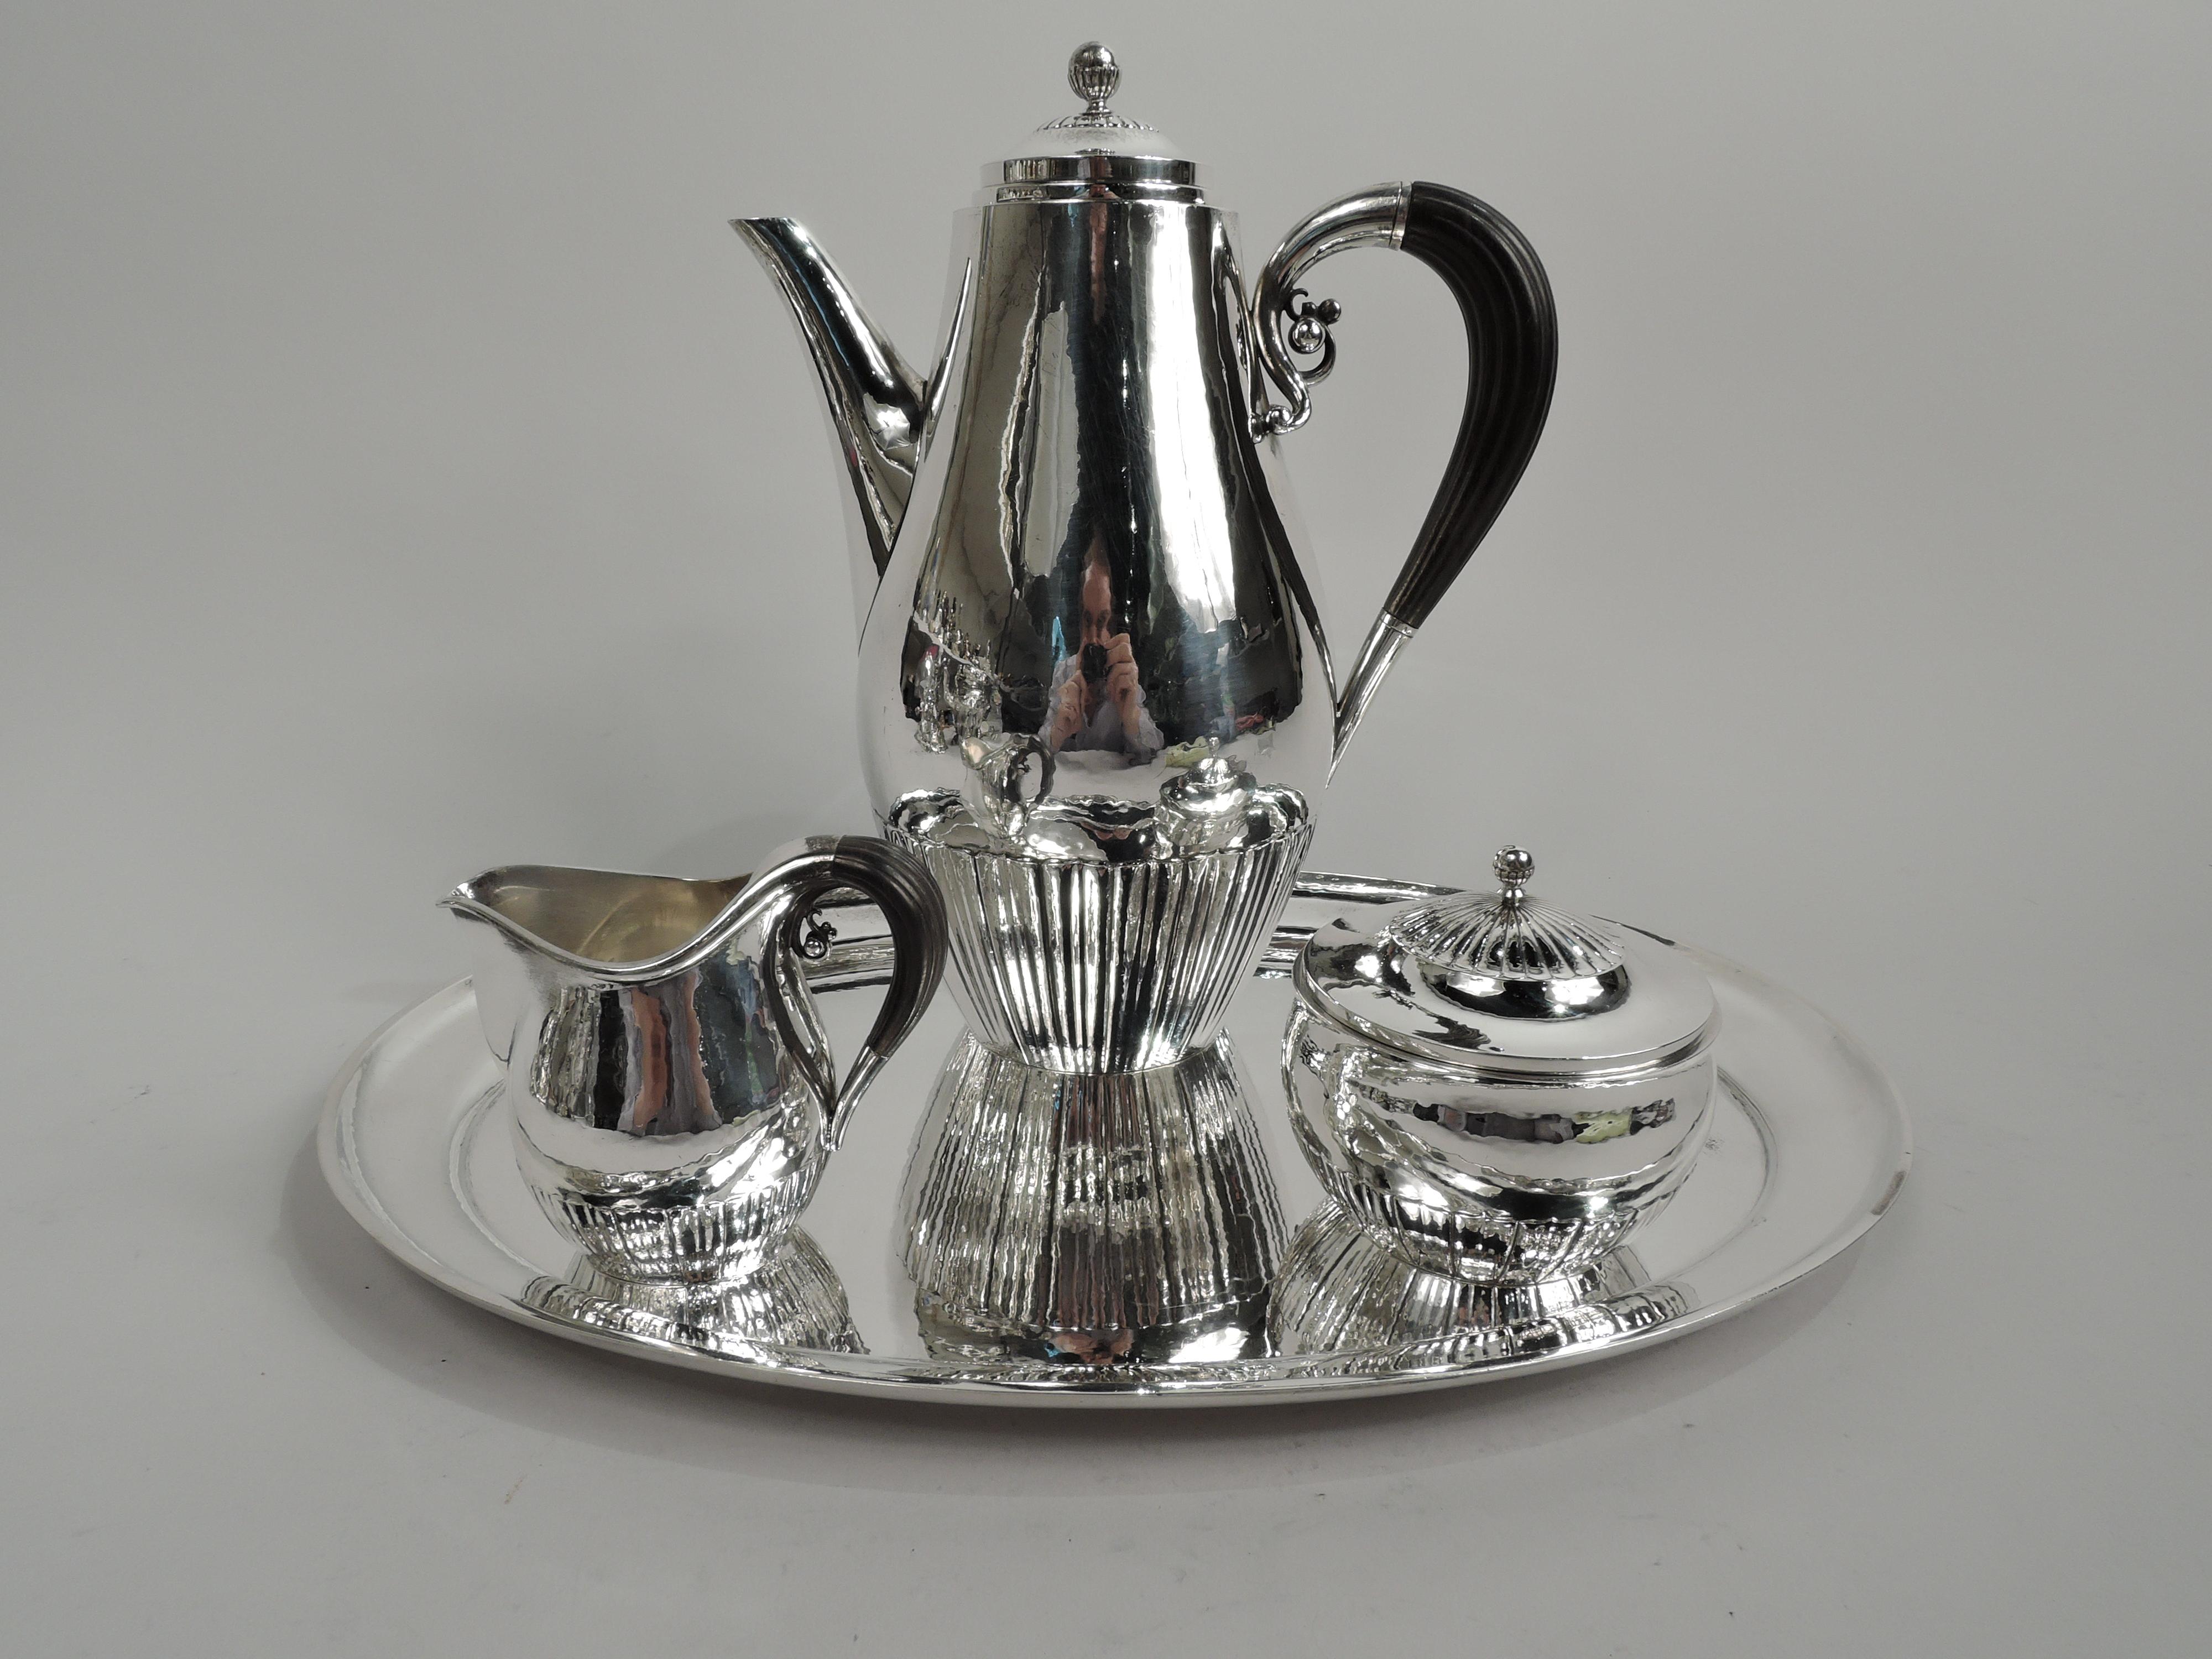 Cosmos sterling silver coffee set on tray. Made by Georg Jensen in Copenhagen. This set comprises coffeepot, creamer, and sugar. Gently curved and half-fluted bodies. Coffeepot and creamer have reeded stained-wood high-looping handles with silver